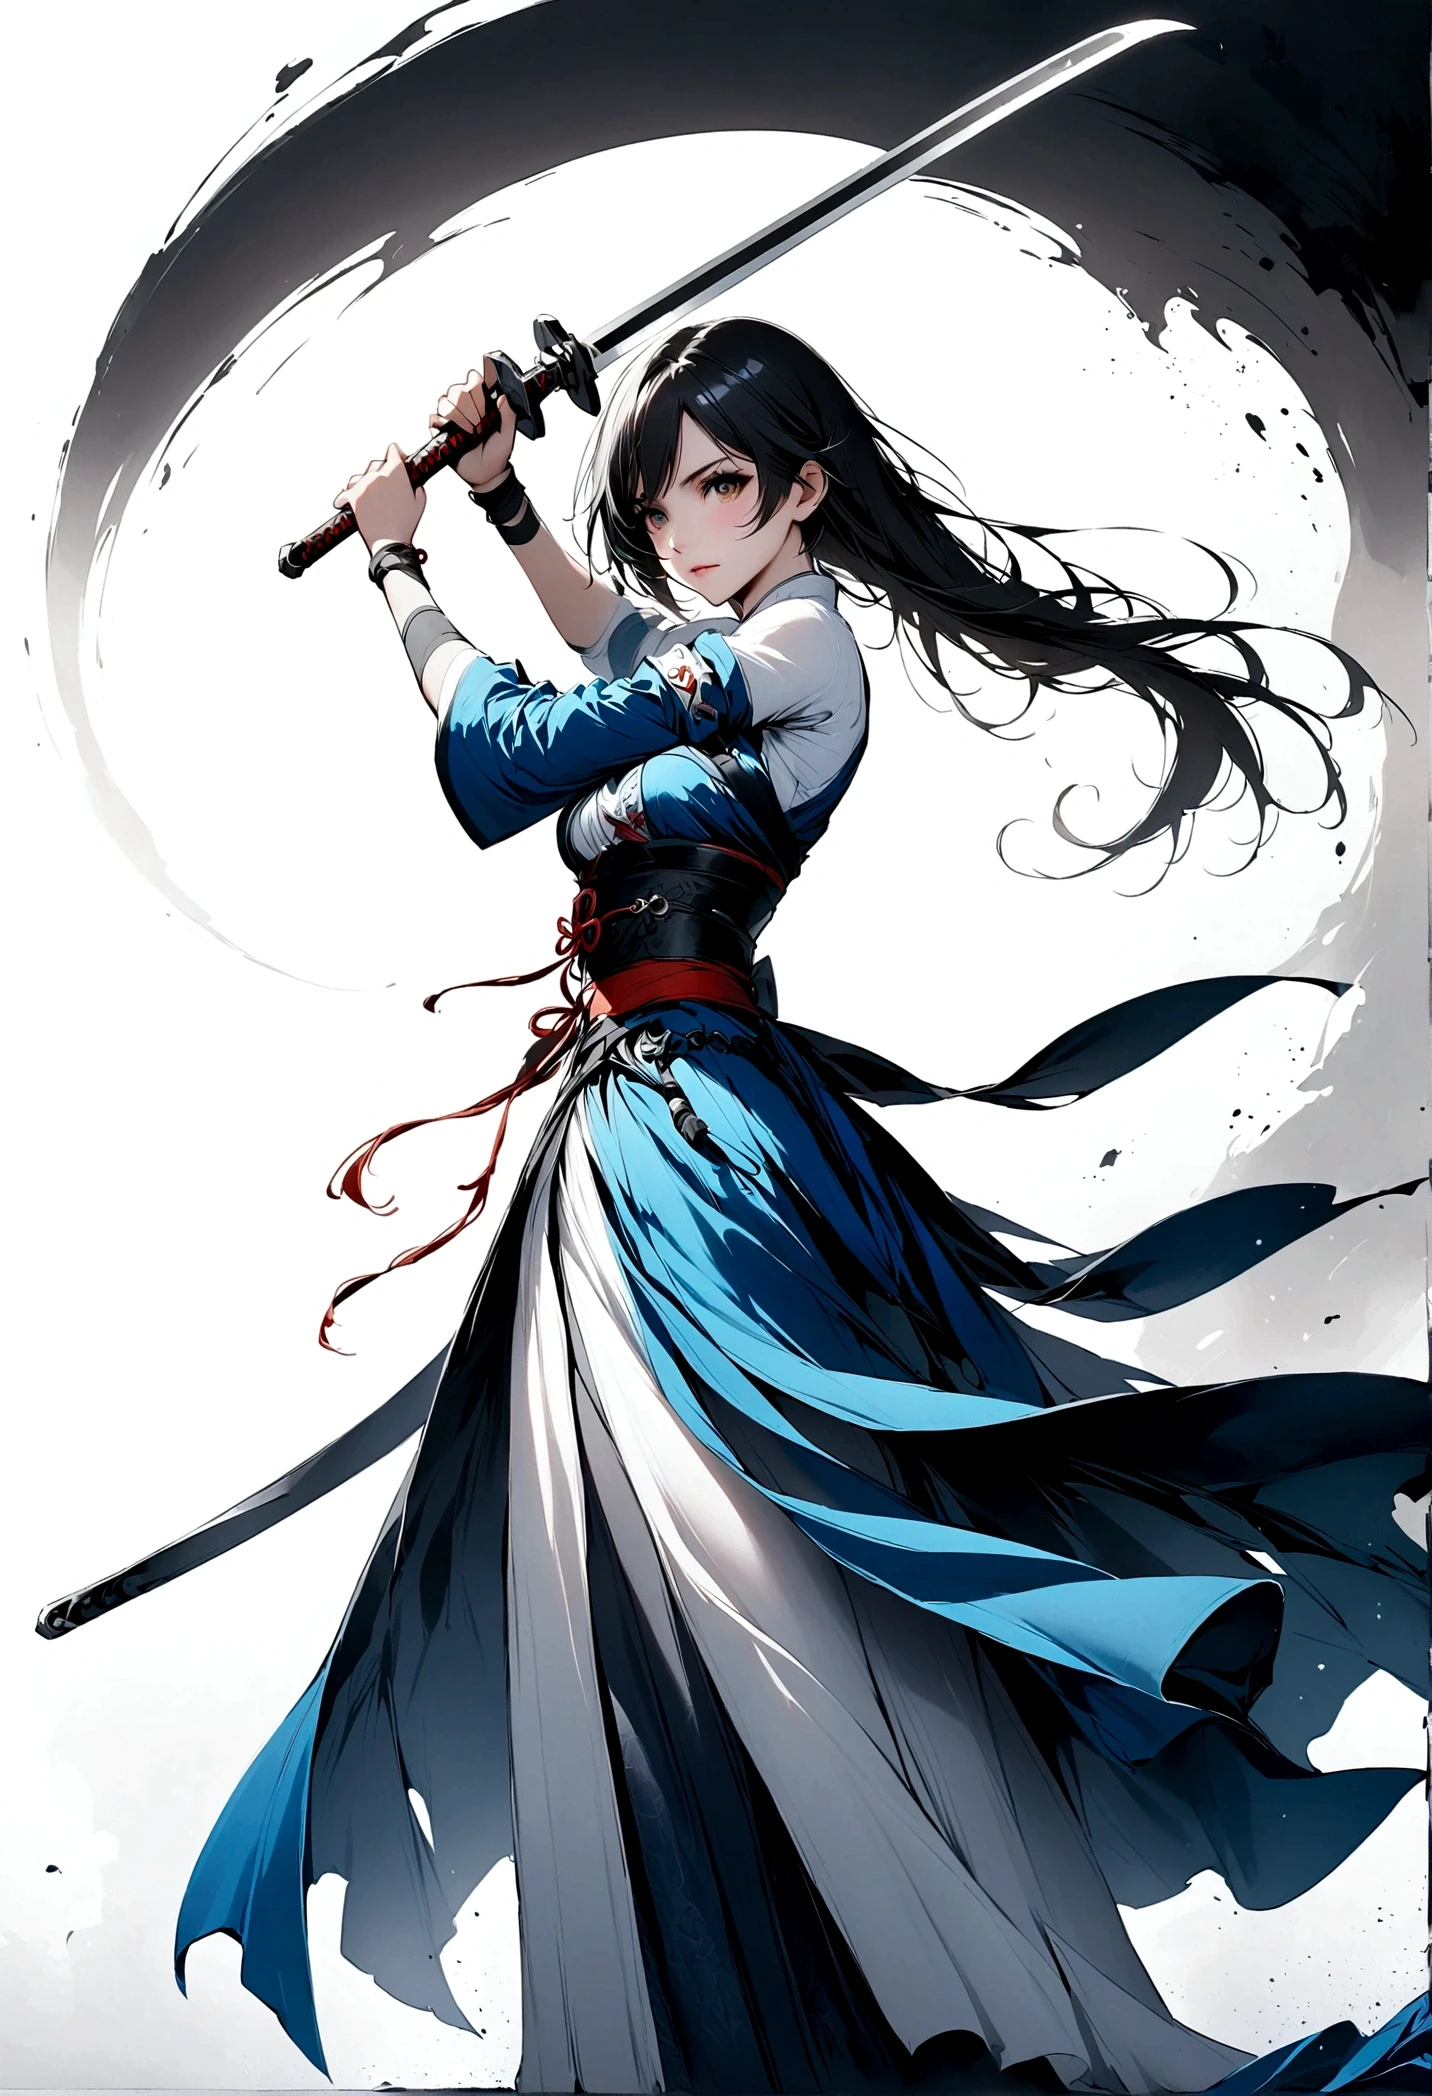 Artistic ink painting，Three-dimensional ink painting，Minimalism，Minimalist graphicinimal Art，Anime girl holding a sword，whole body，Chinese style，antiquity，Ink Painting，Blue robe，Black long hair，Black and white background，Ancient Style White Space，White Space，Large White Space，Texture Matte，Low saturation，Minimalist composition，Master composition